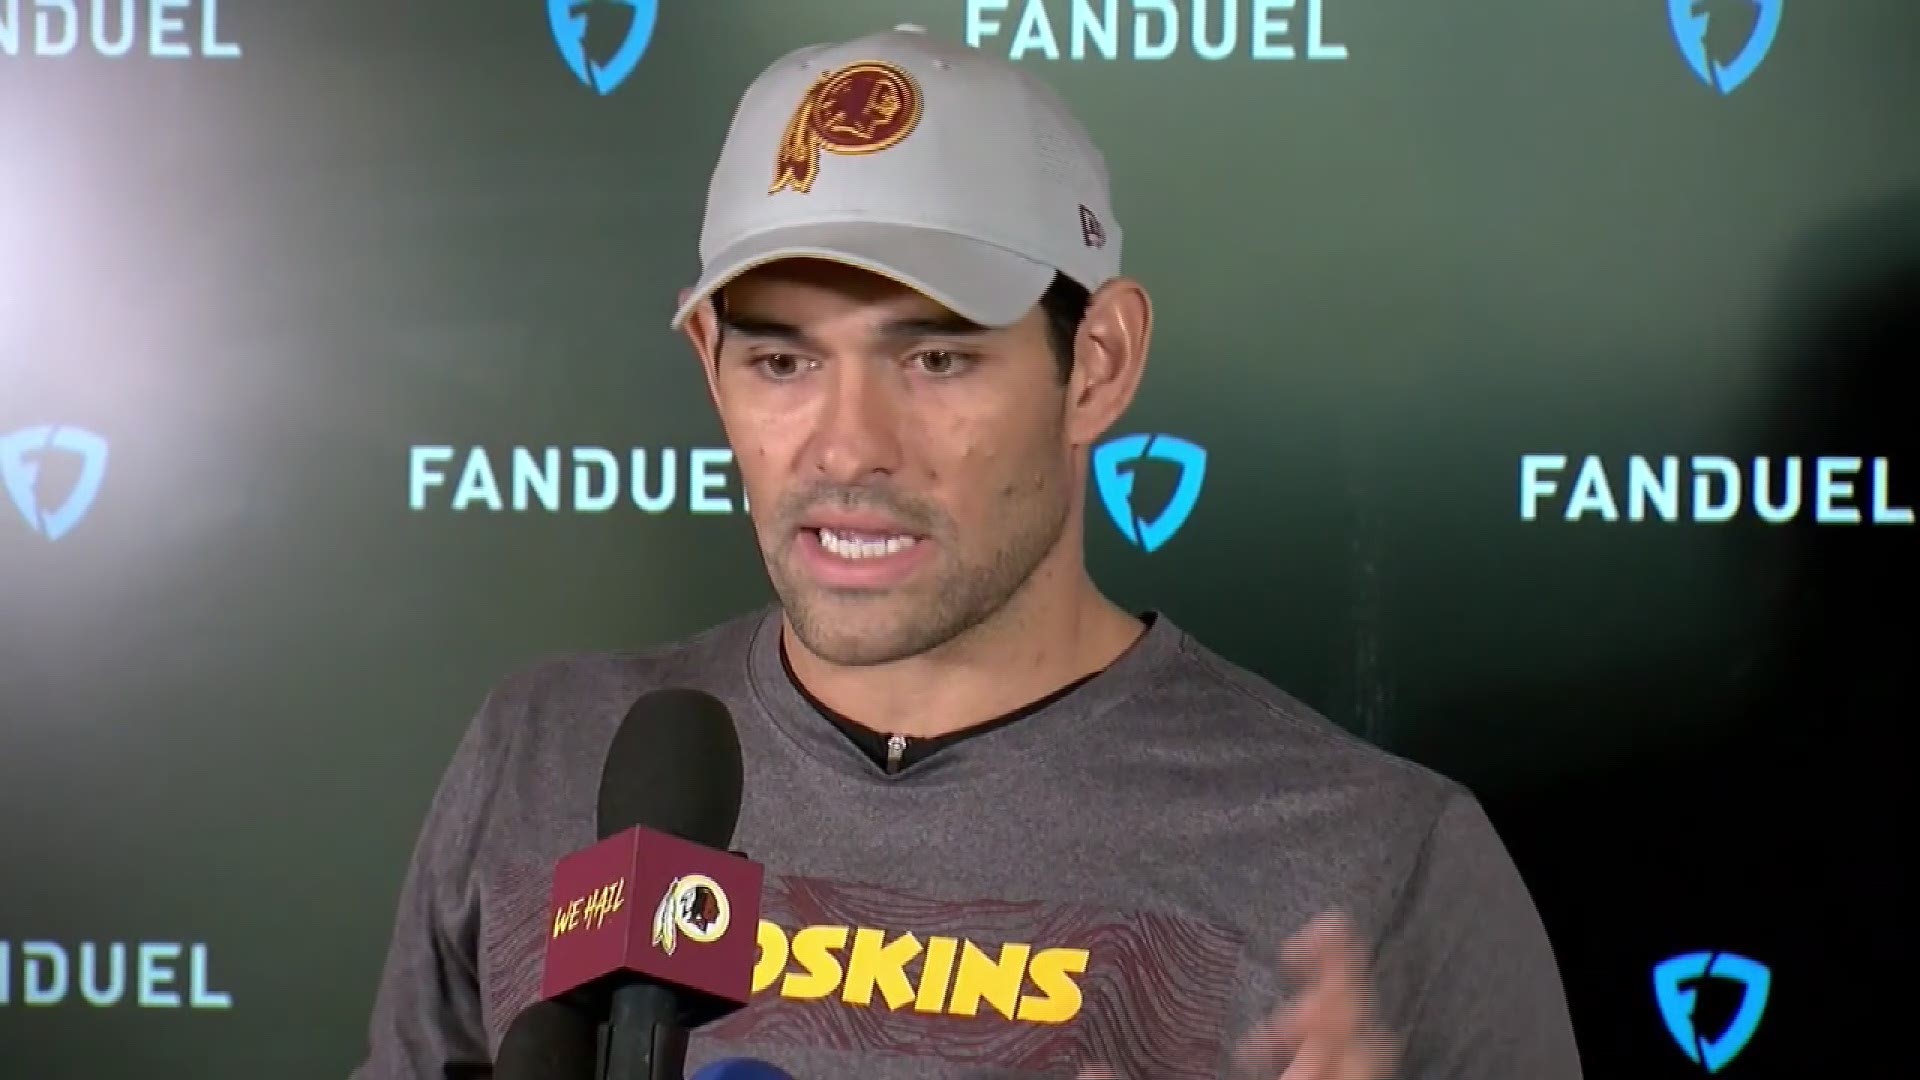 After losing two quarterbacks to broken legs, the Redskins turn to Mark Sanchez this week against the Giants.